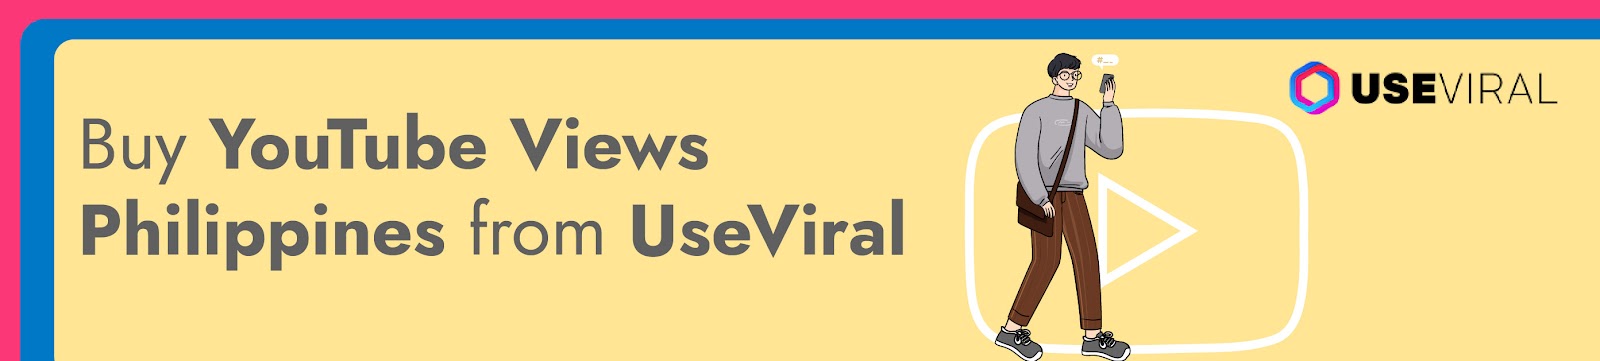 Buy YouTube views Philippines from UseViral